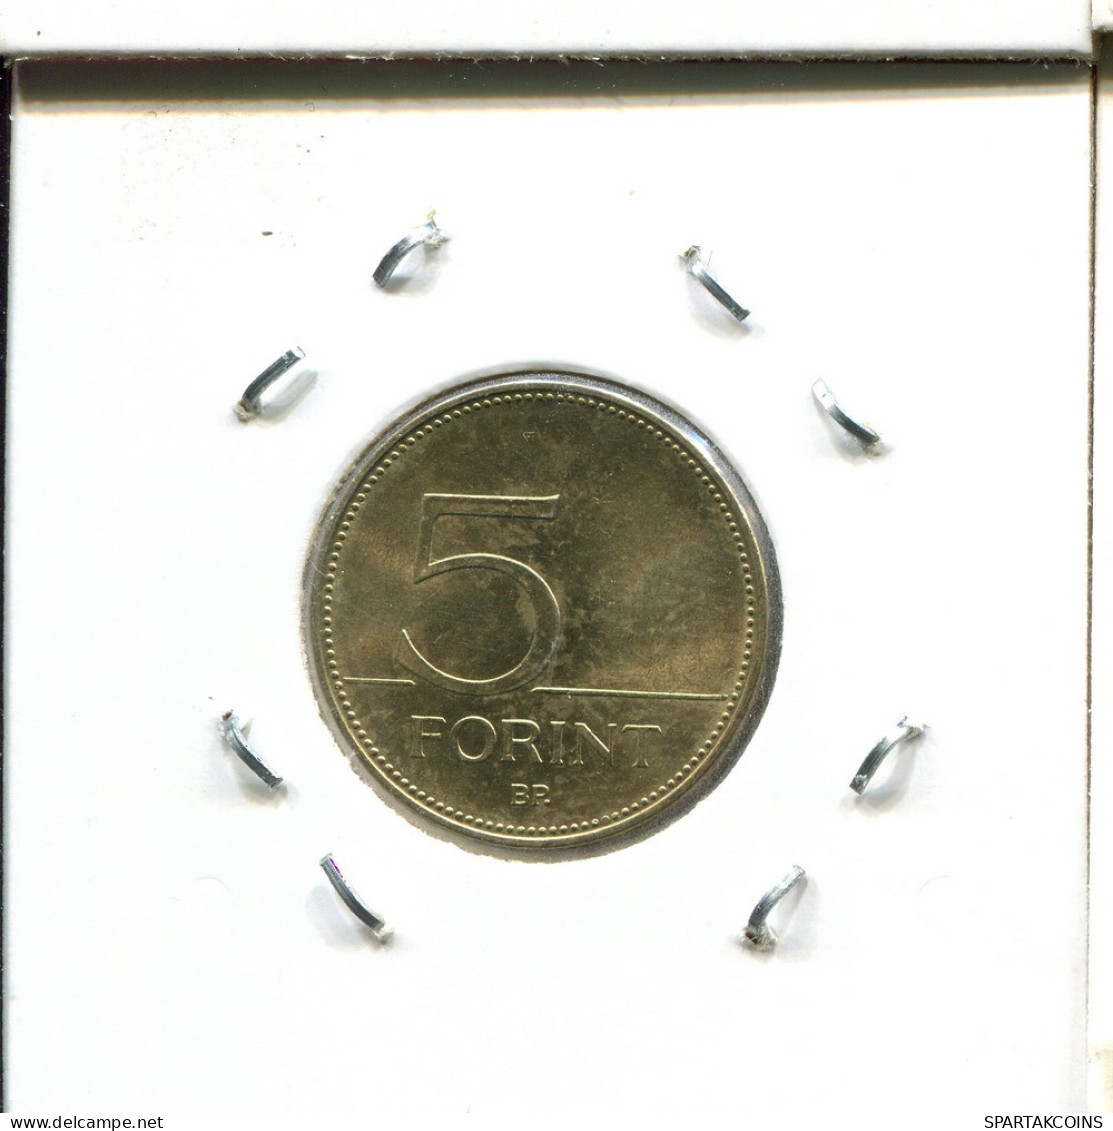 5 FORINT 2006 HUNGARY Coin #AS514.U.A - Ungarn